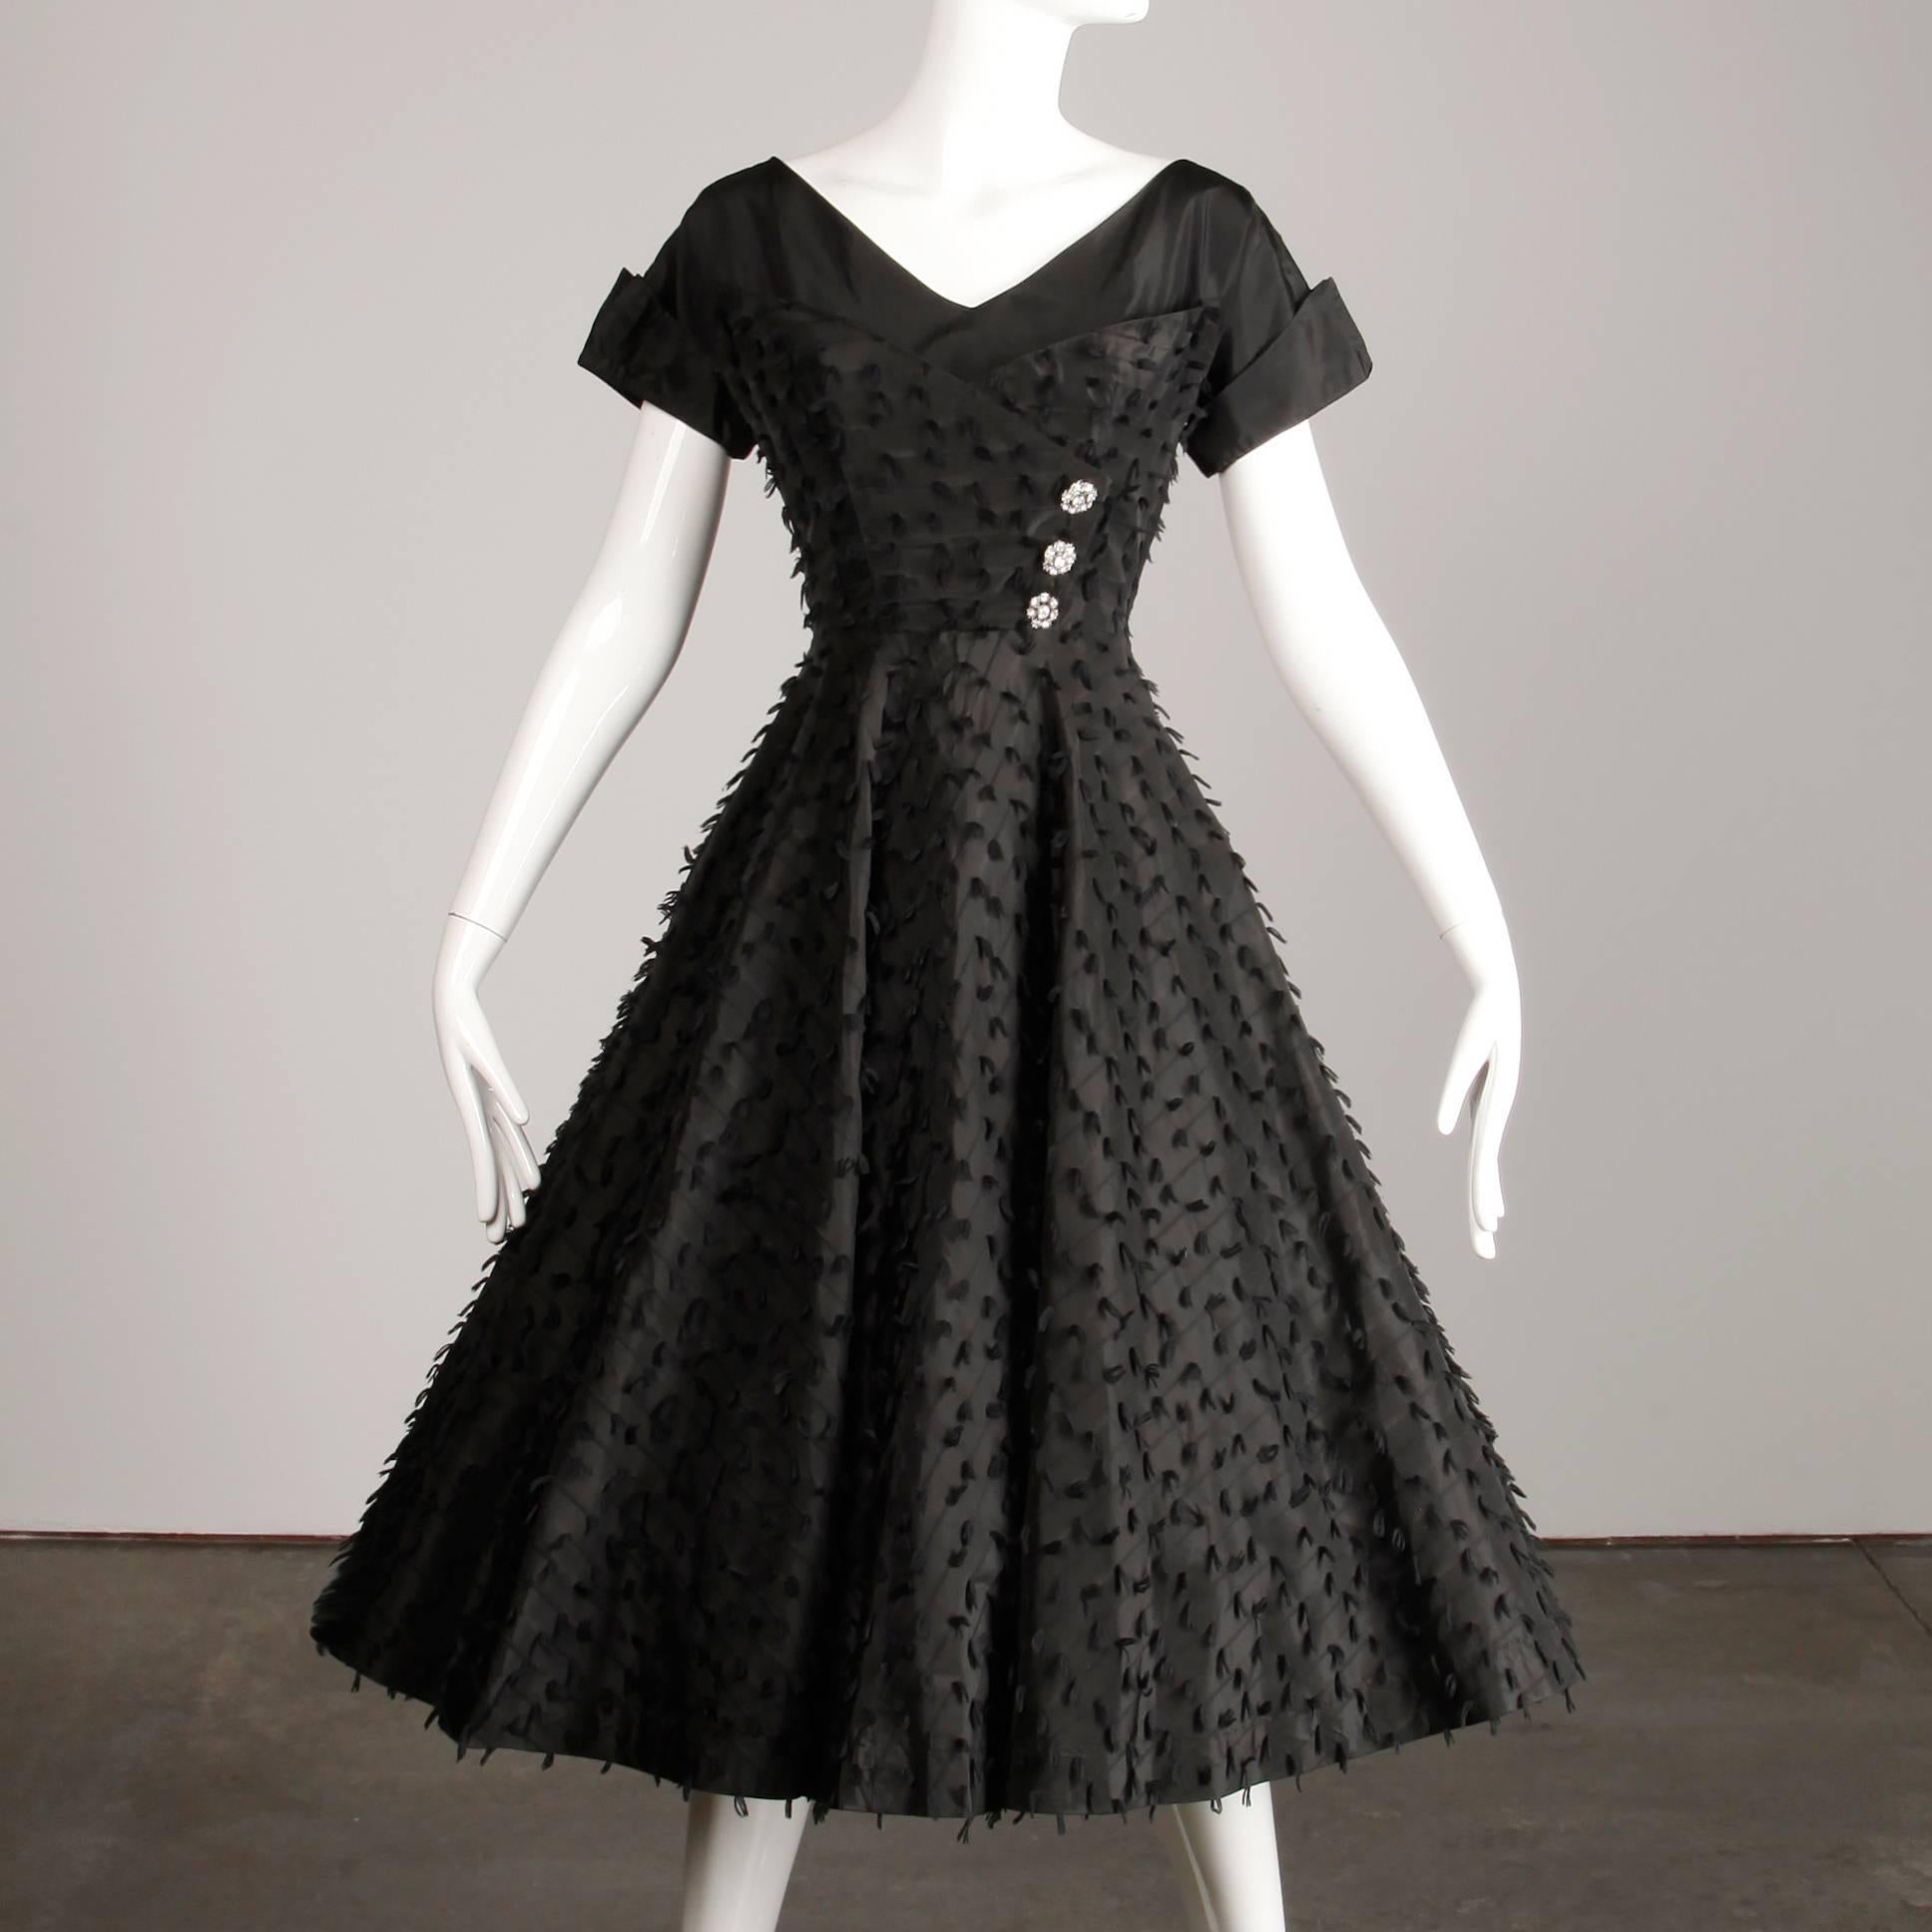 Gorgeous vintage 1950s cocktail dress in a black eyelash taffeta. Features a full sweep and three asymmetric rhinestone buttons. Unlined with side metal zip closure. Fits like a modern size S-M. The bust measures 37